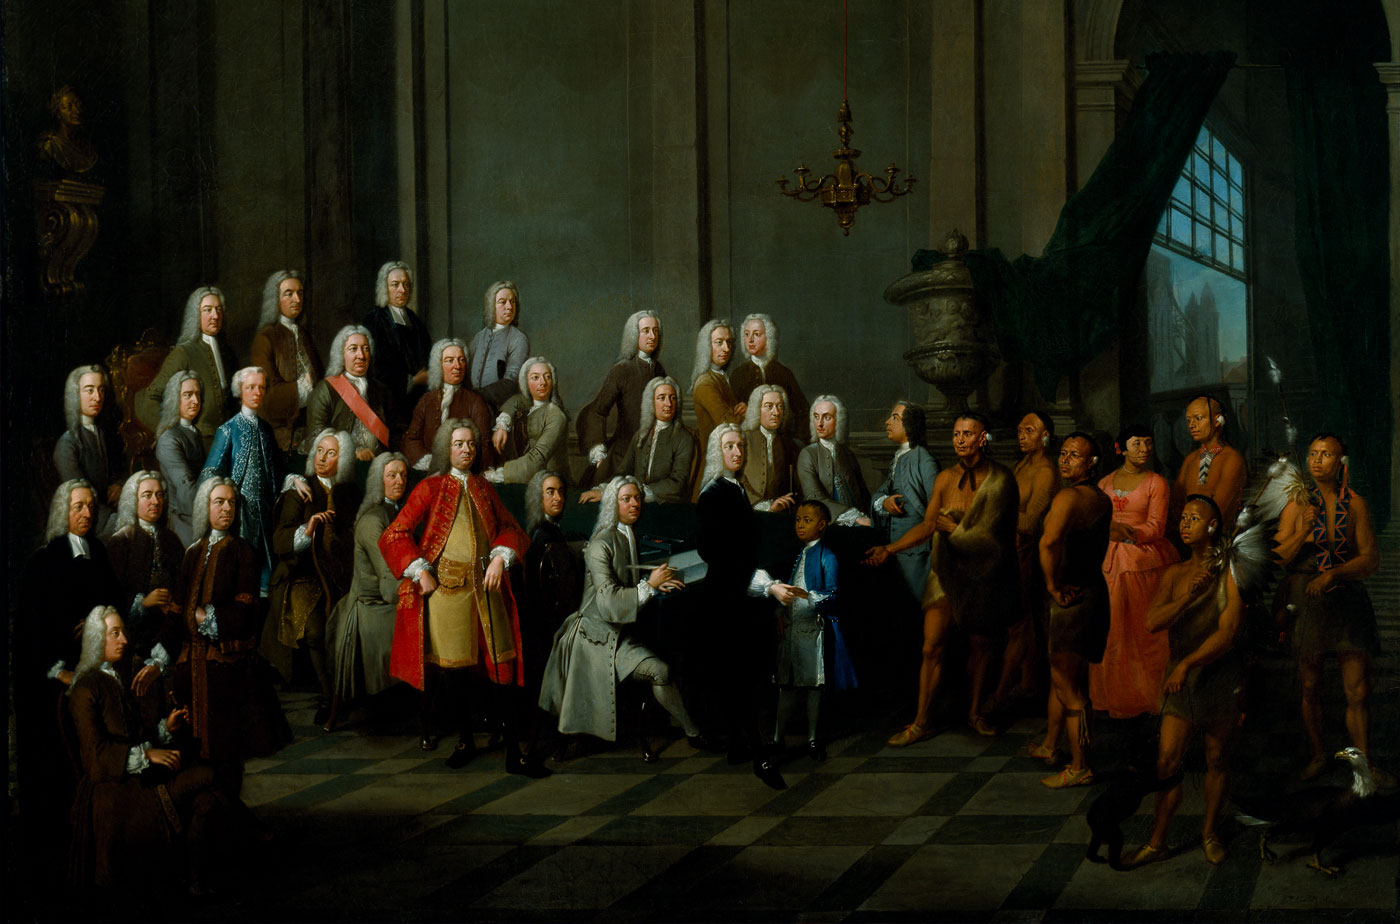 Audience Given by the Trustees of Georgia to a Delegation of Creek Indians. by William Verelst, gift of Henry Francis du Pont, 1956, Courtesy, Winterthur Museum